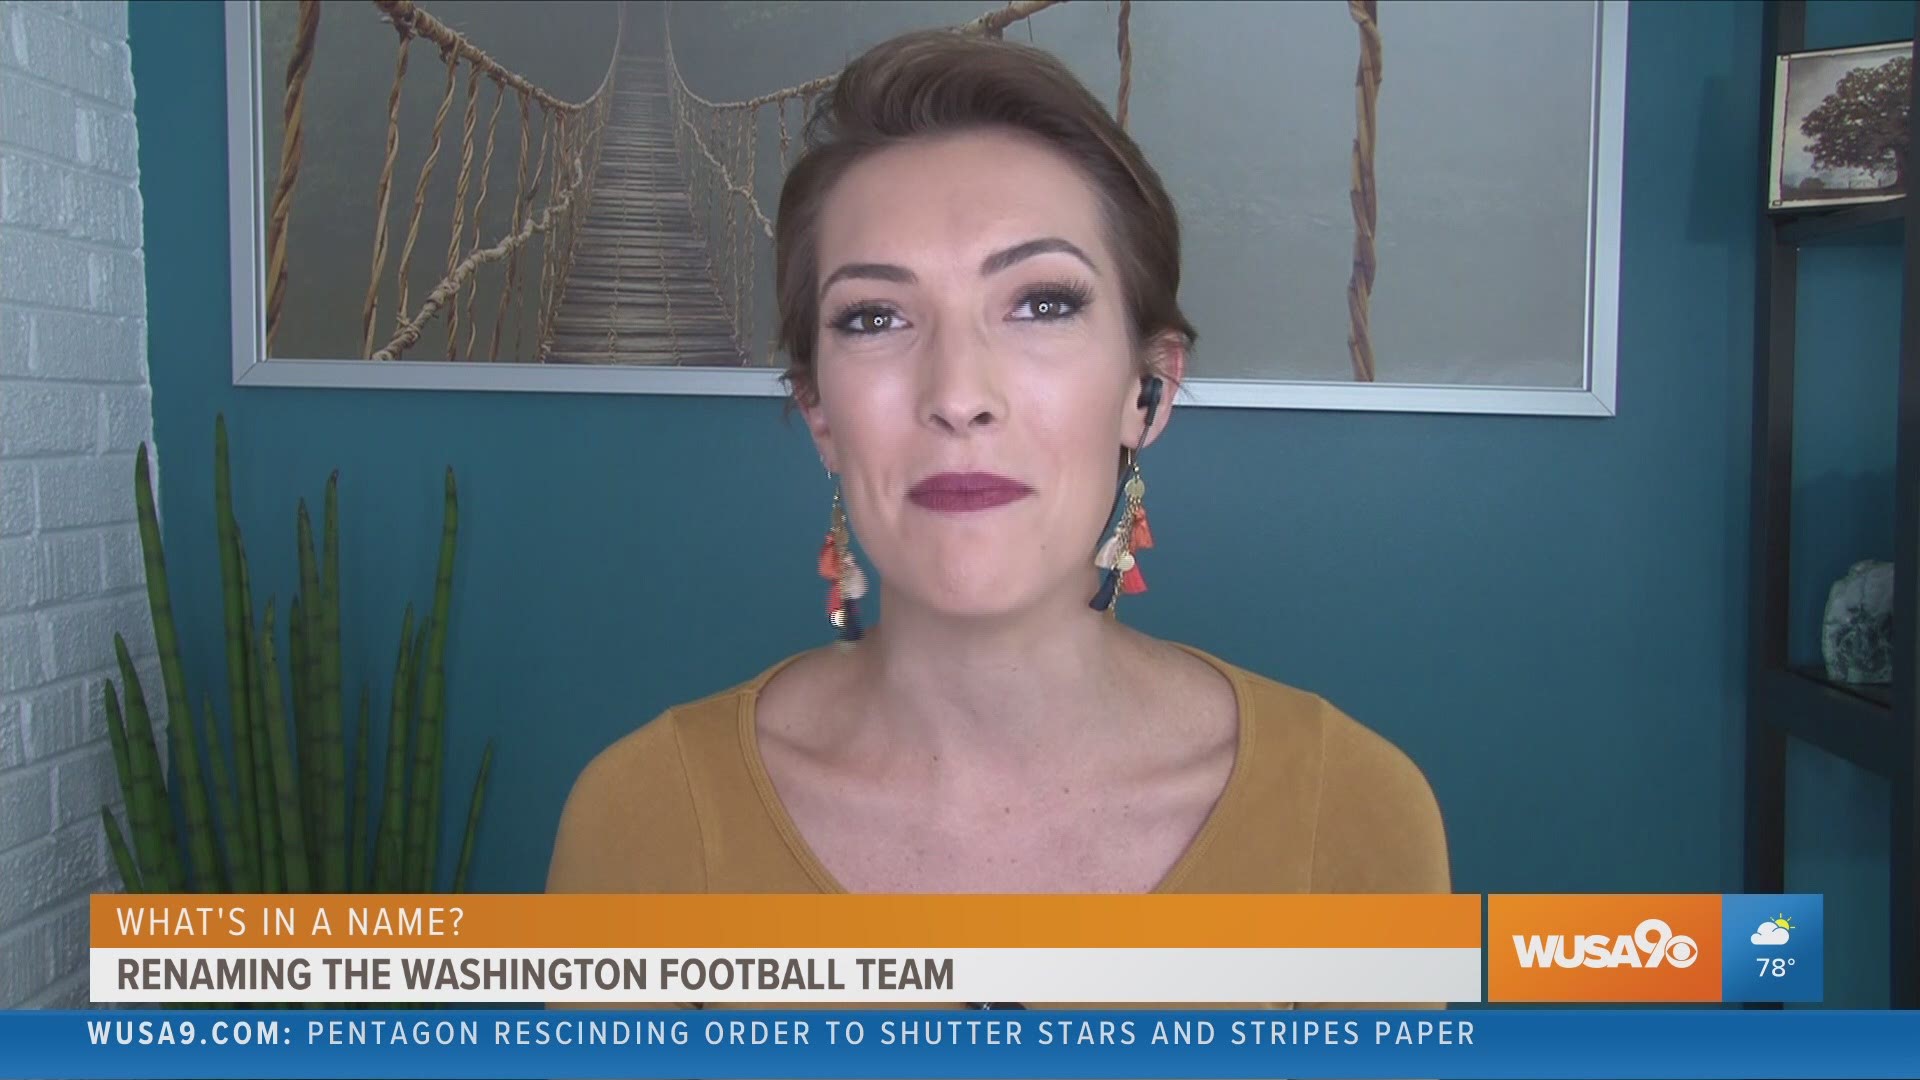 PR consultant Krystal Glass explores the value of the Washington Football Team's new name. To learn more, visit KrystalGlassCommunications.com.